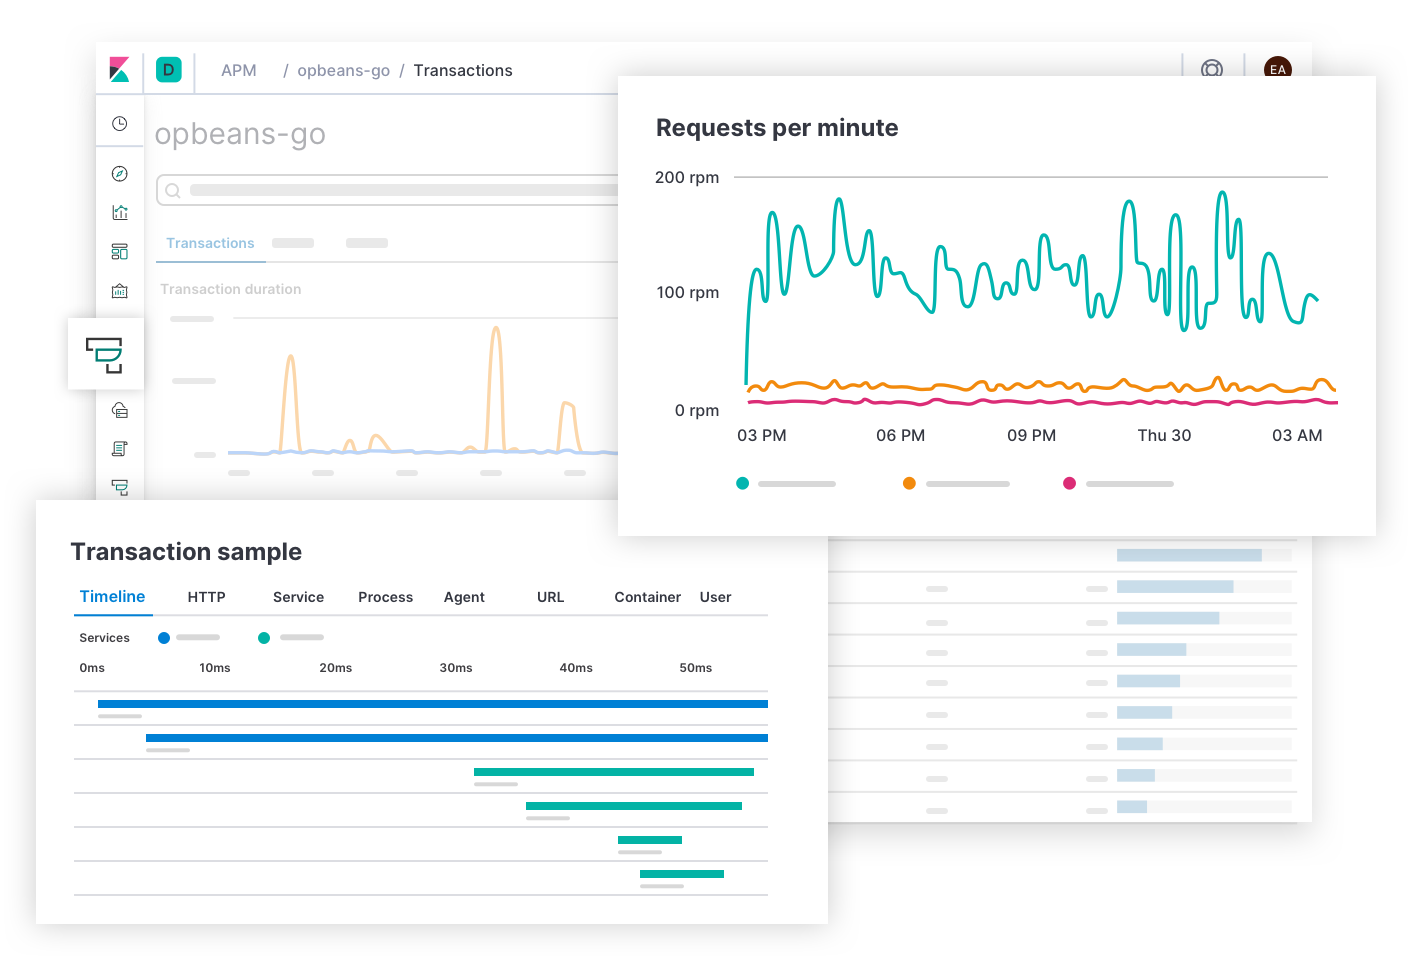 KR: Application Performance Monitoring charts and graphs